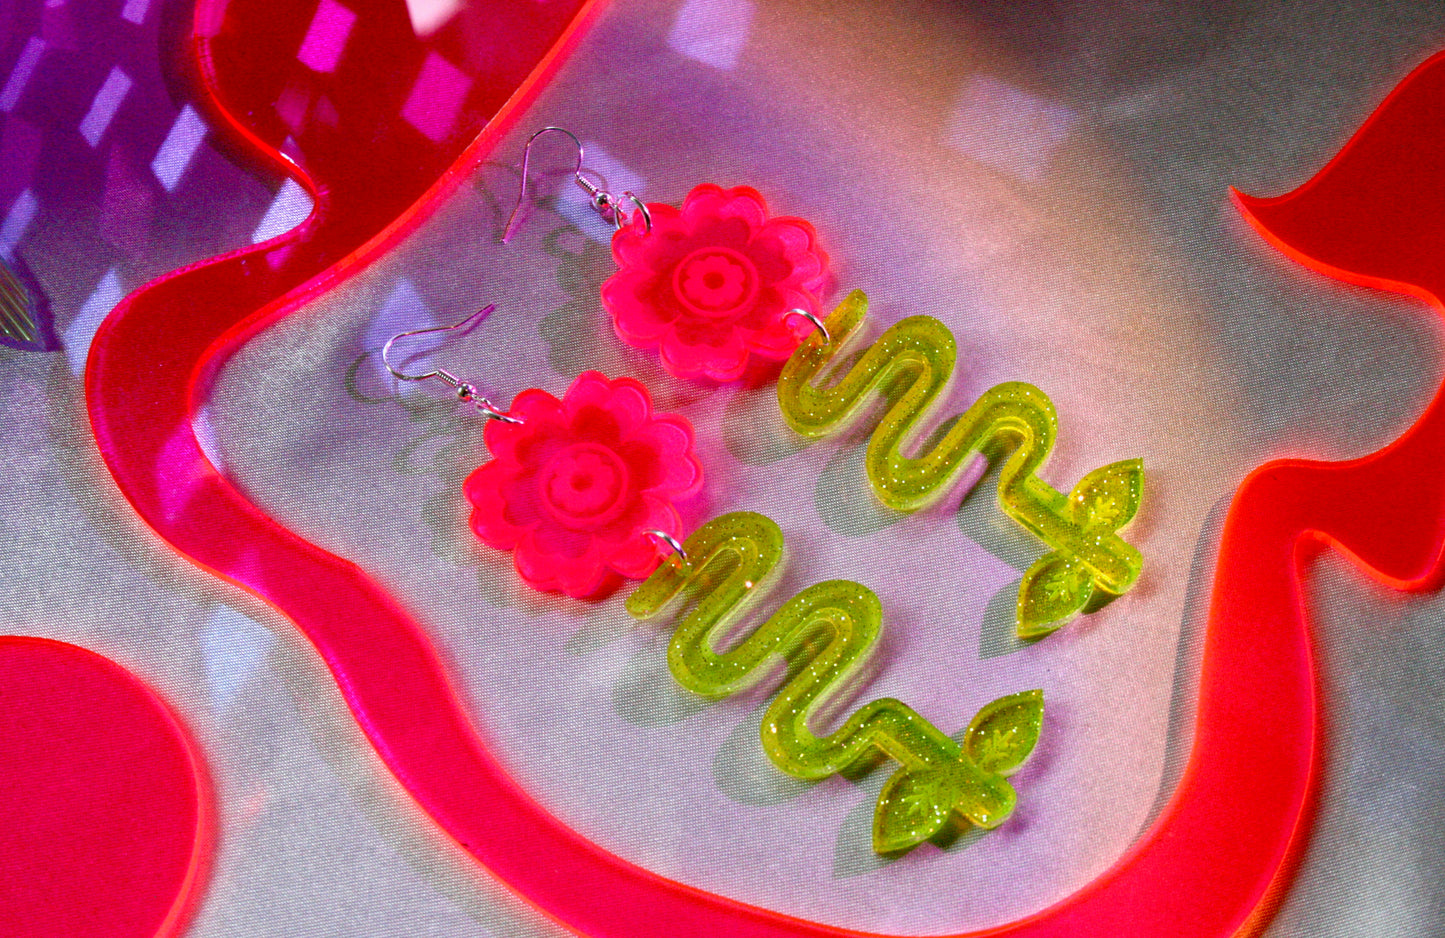 Flower Blossom Earrings- Neon Sparkly Green Pink Unique Art Deco